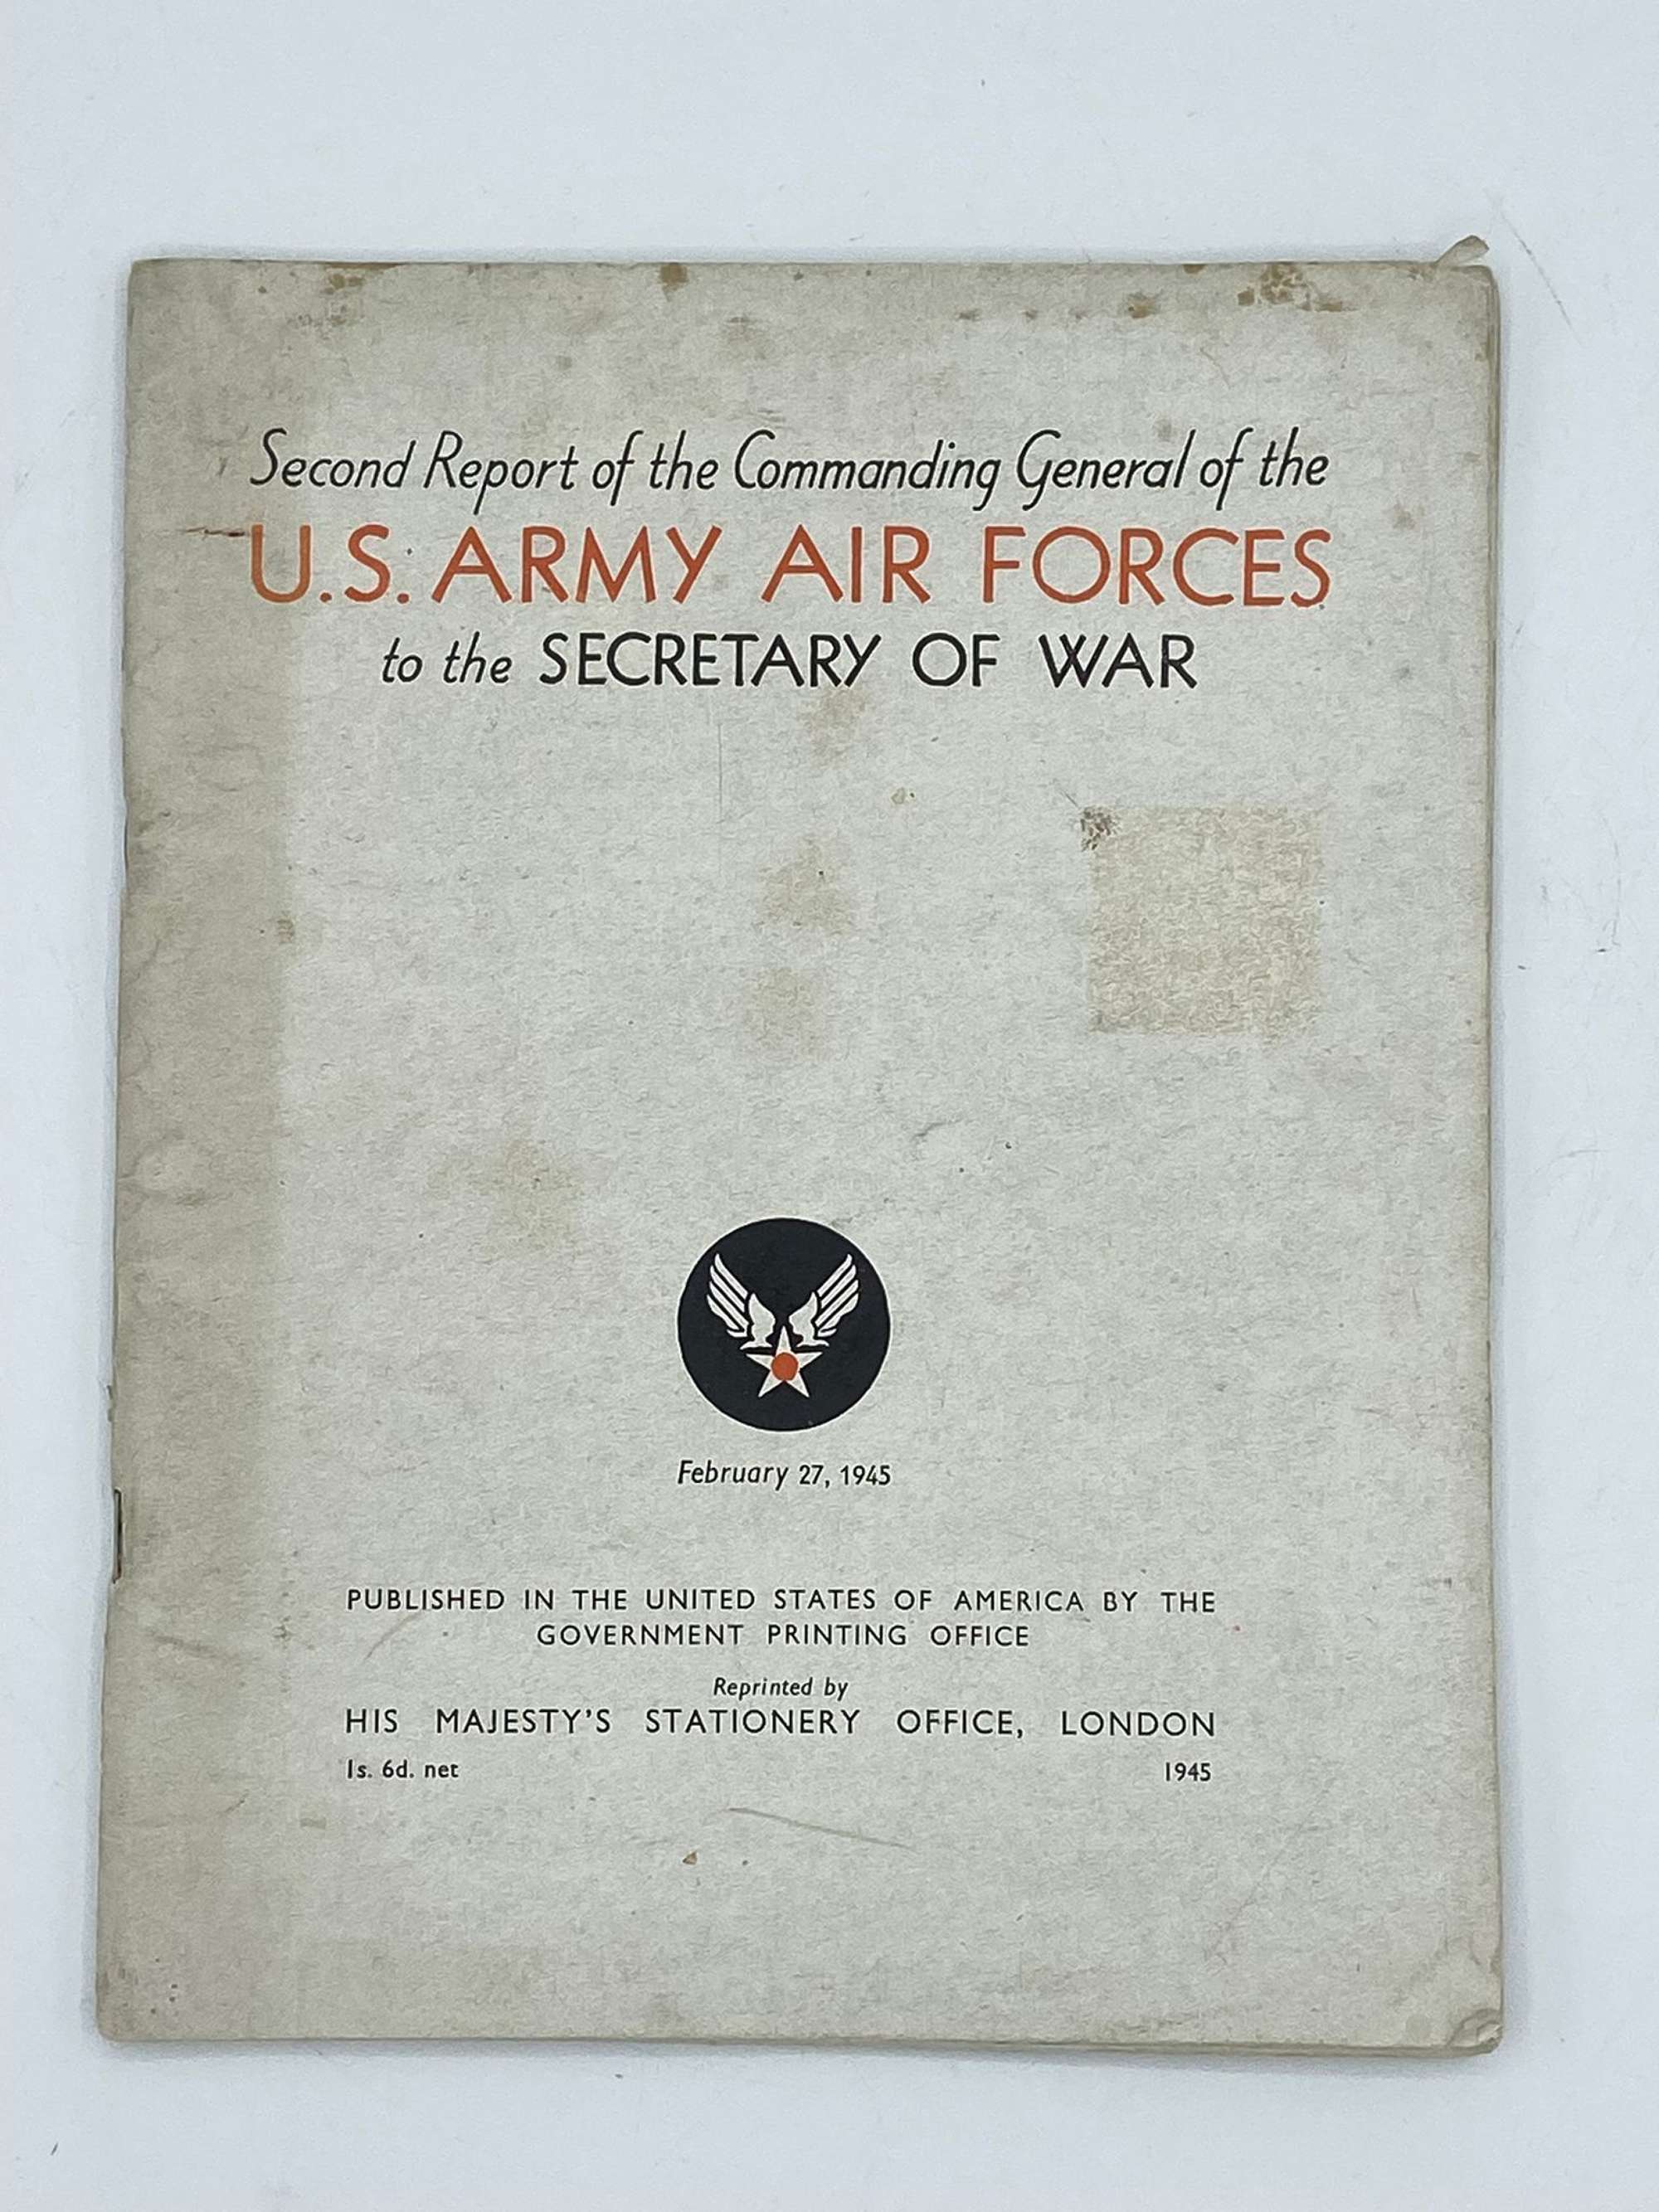 WW2 2nd Report of the Commanding General of the U.S. Army Air Forces